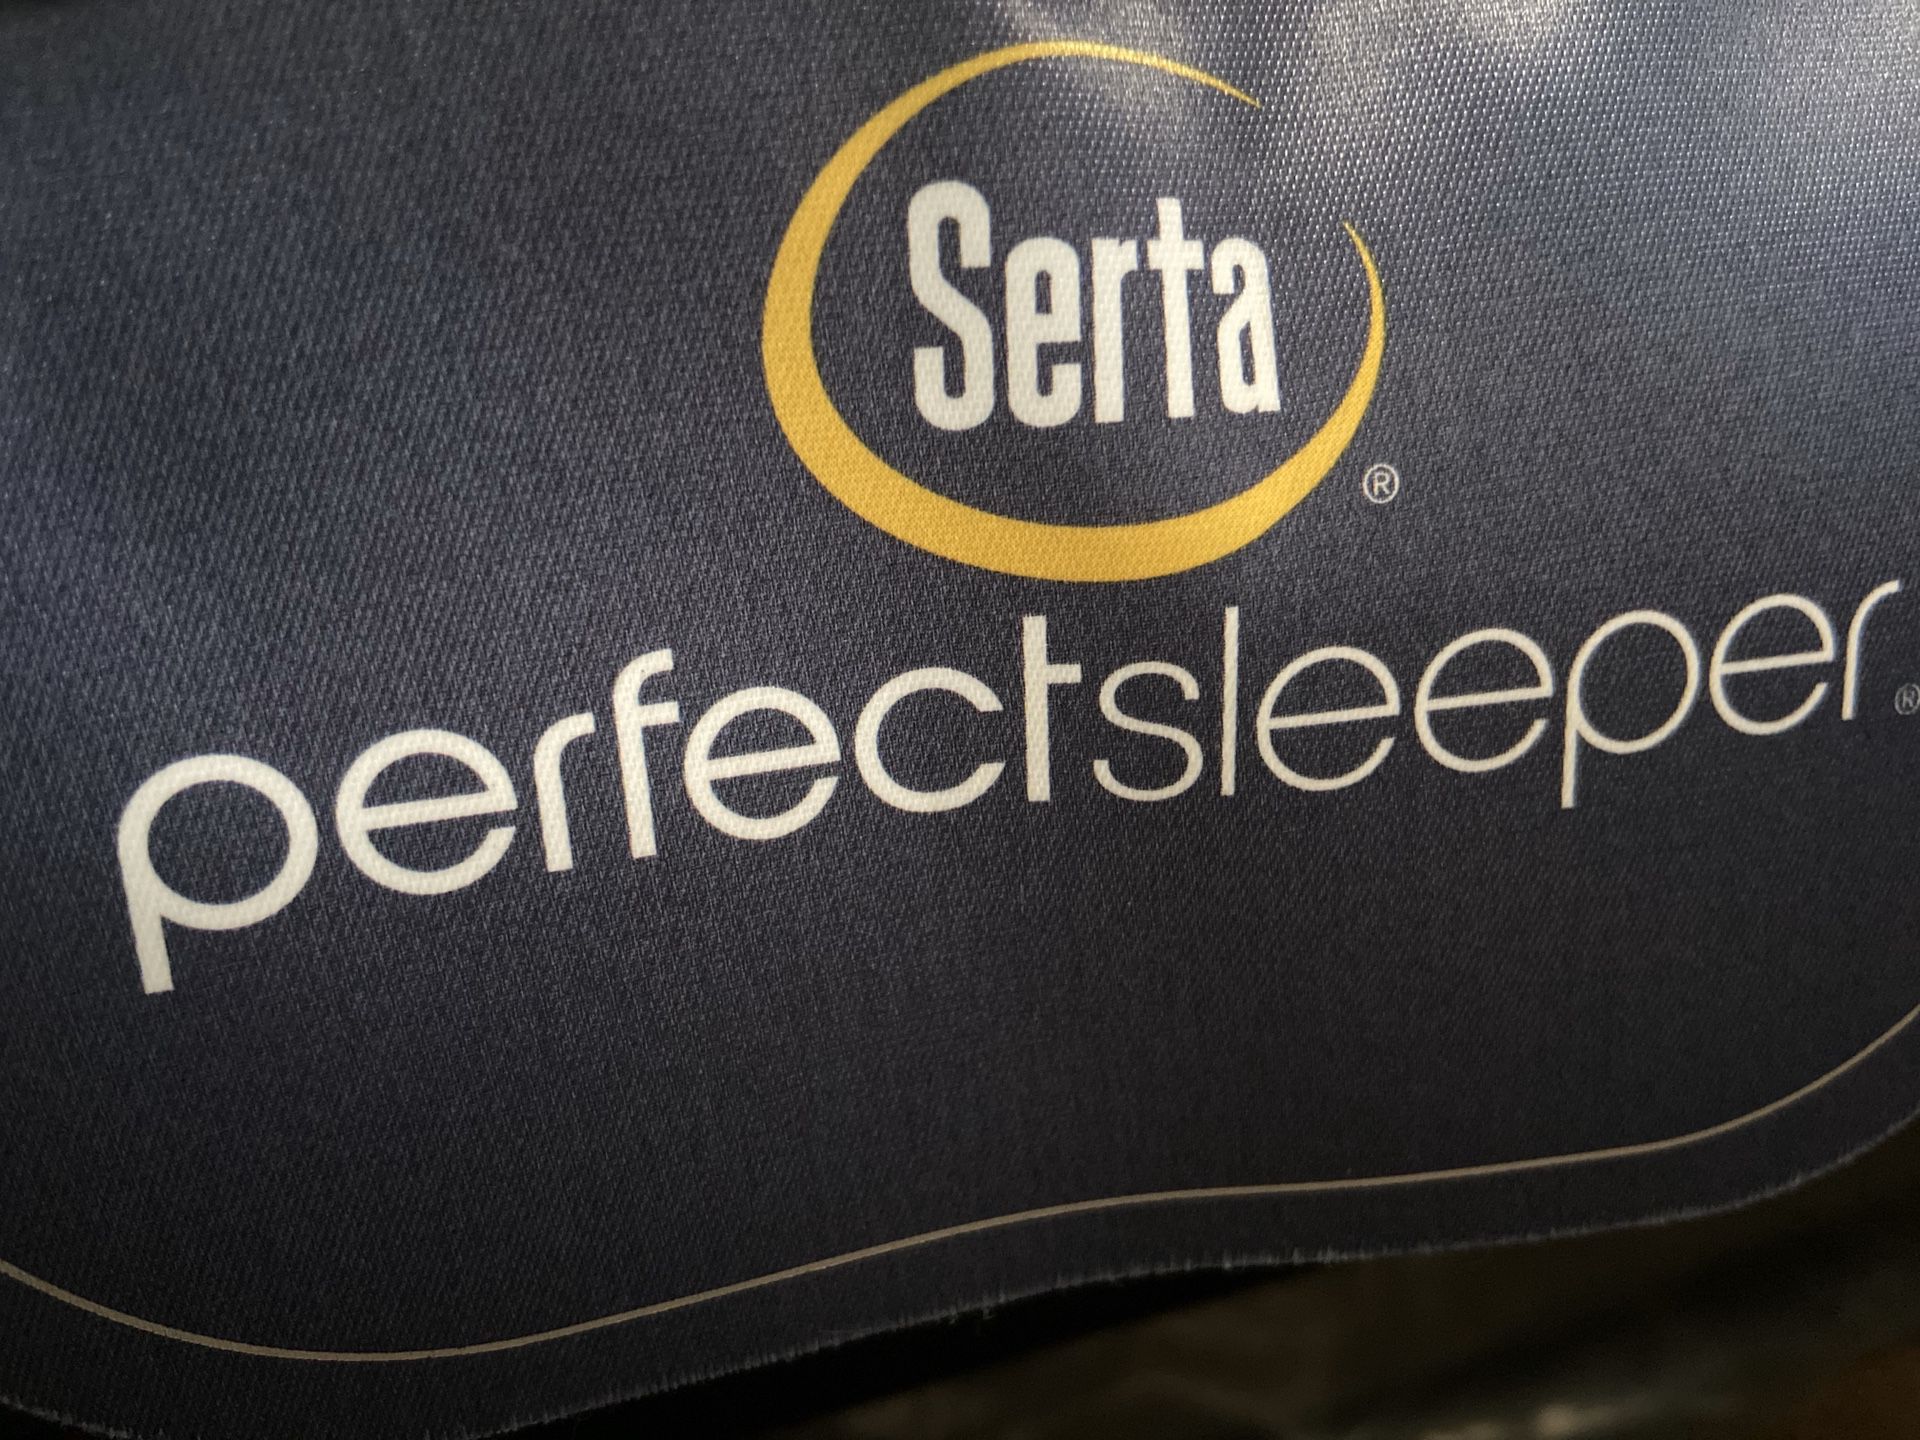 Queen Serta perfect sleep mattress, box spring and canopy bed frame